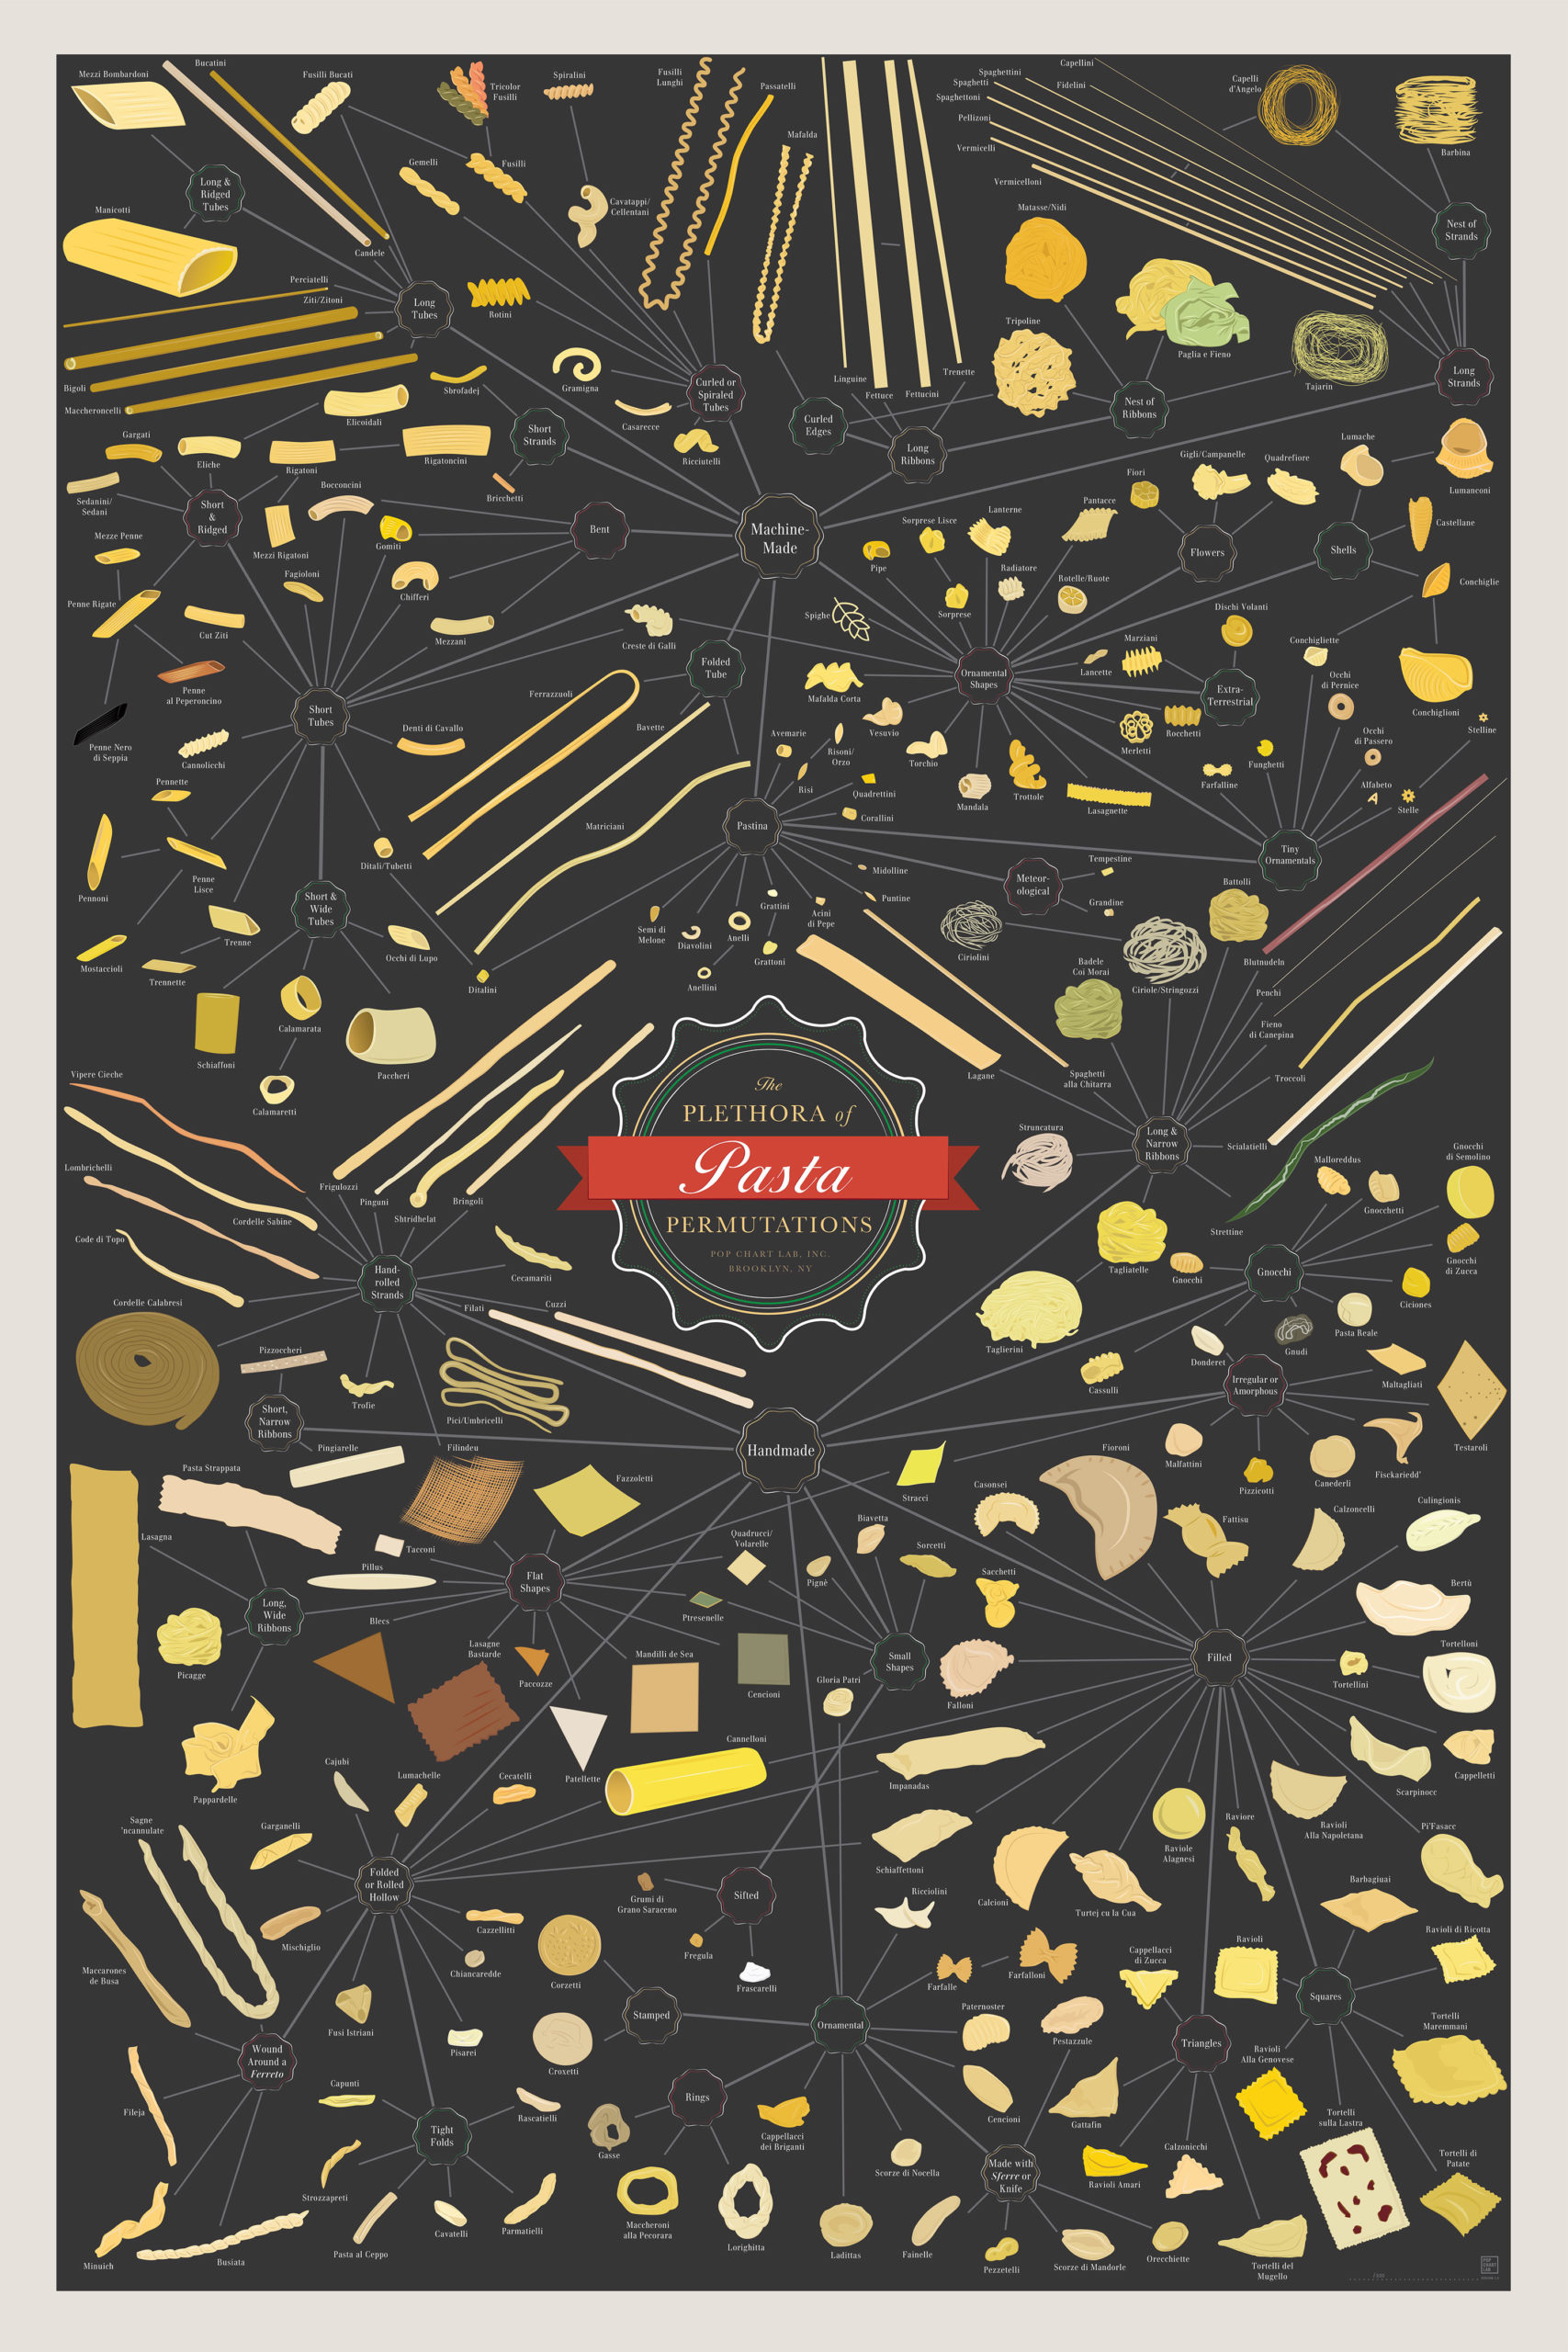 Increase Your Knowledge Of Noodles With This Encyclopedic Pasta Poster